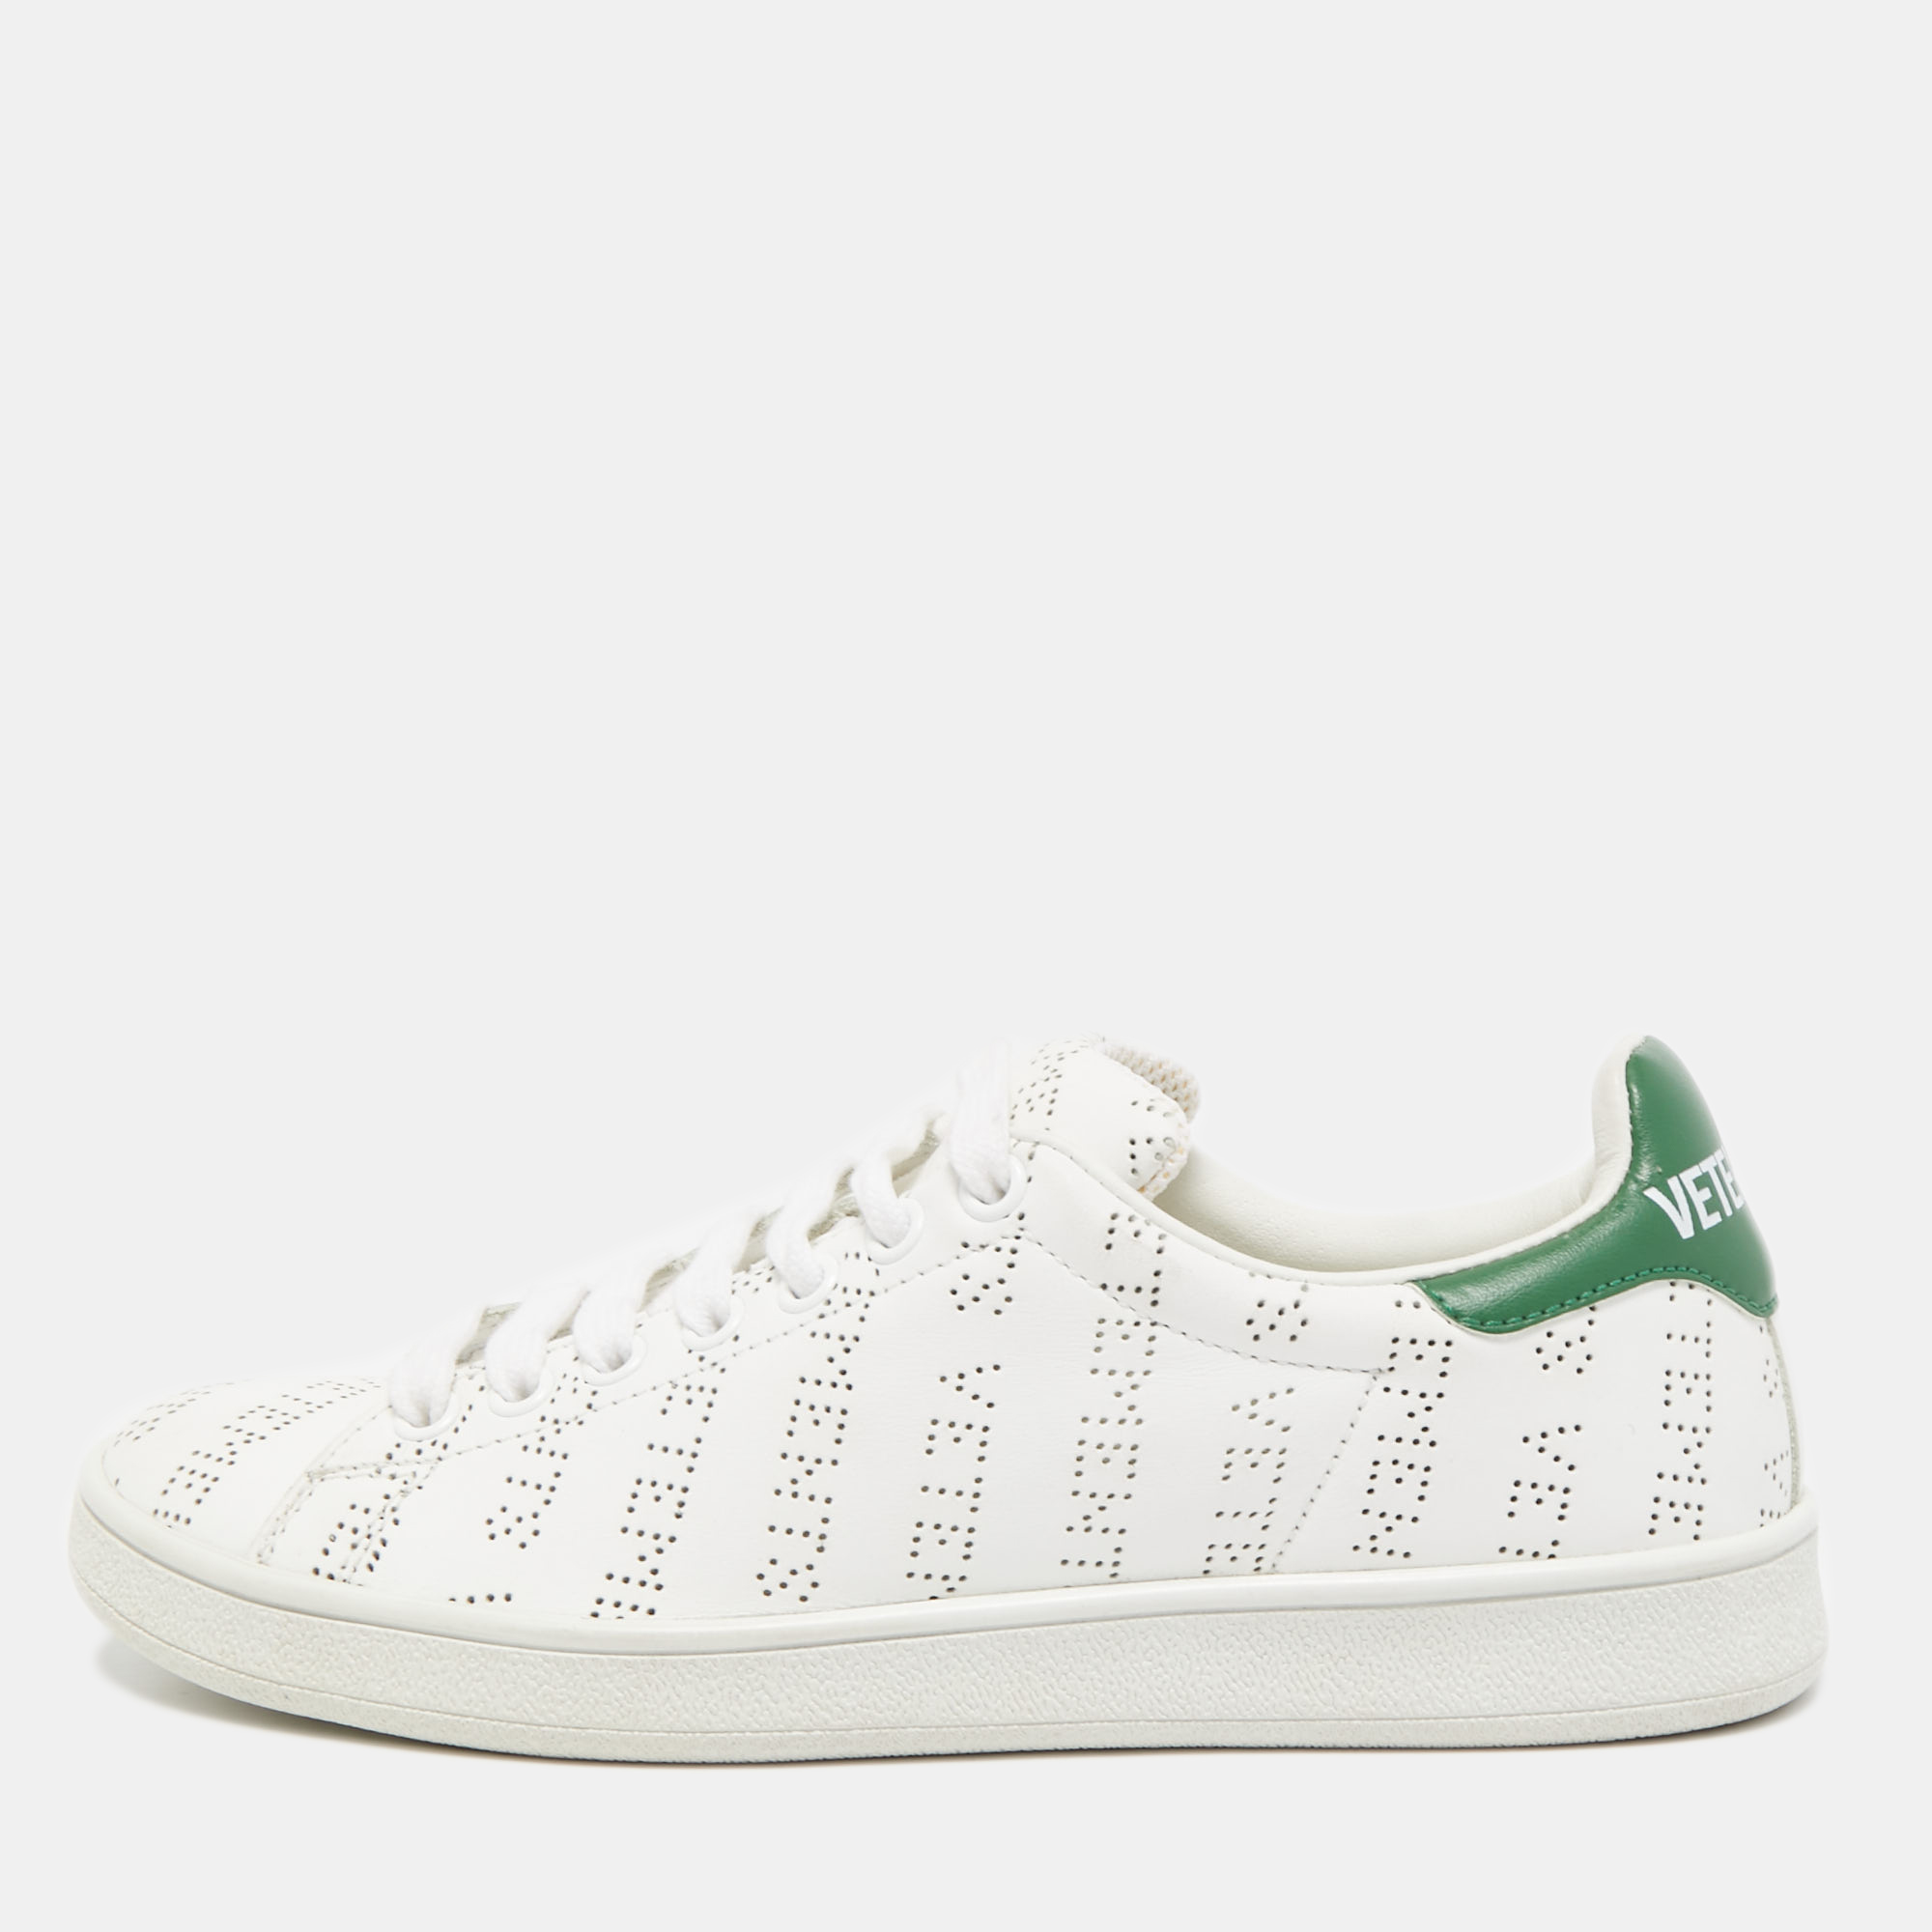 vetements white perforated logo leather low top sneakers size 35